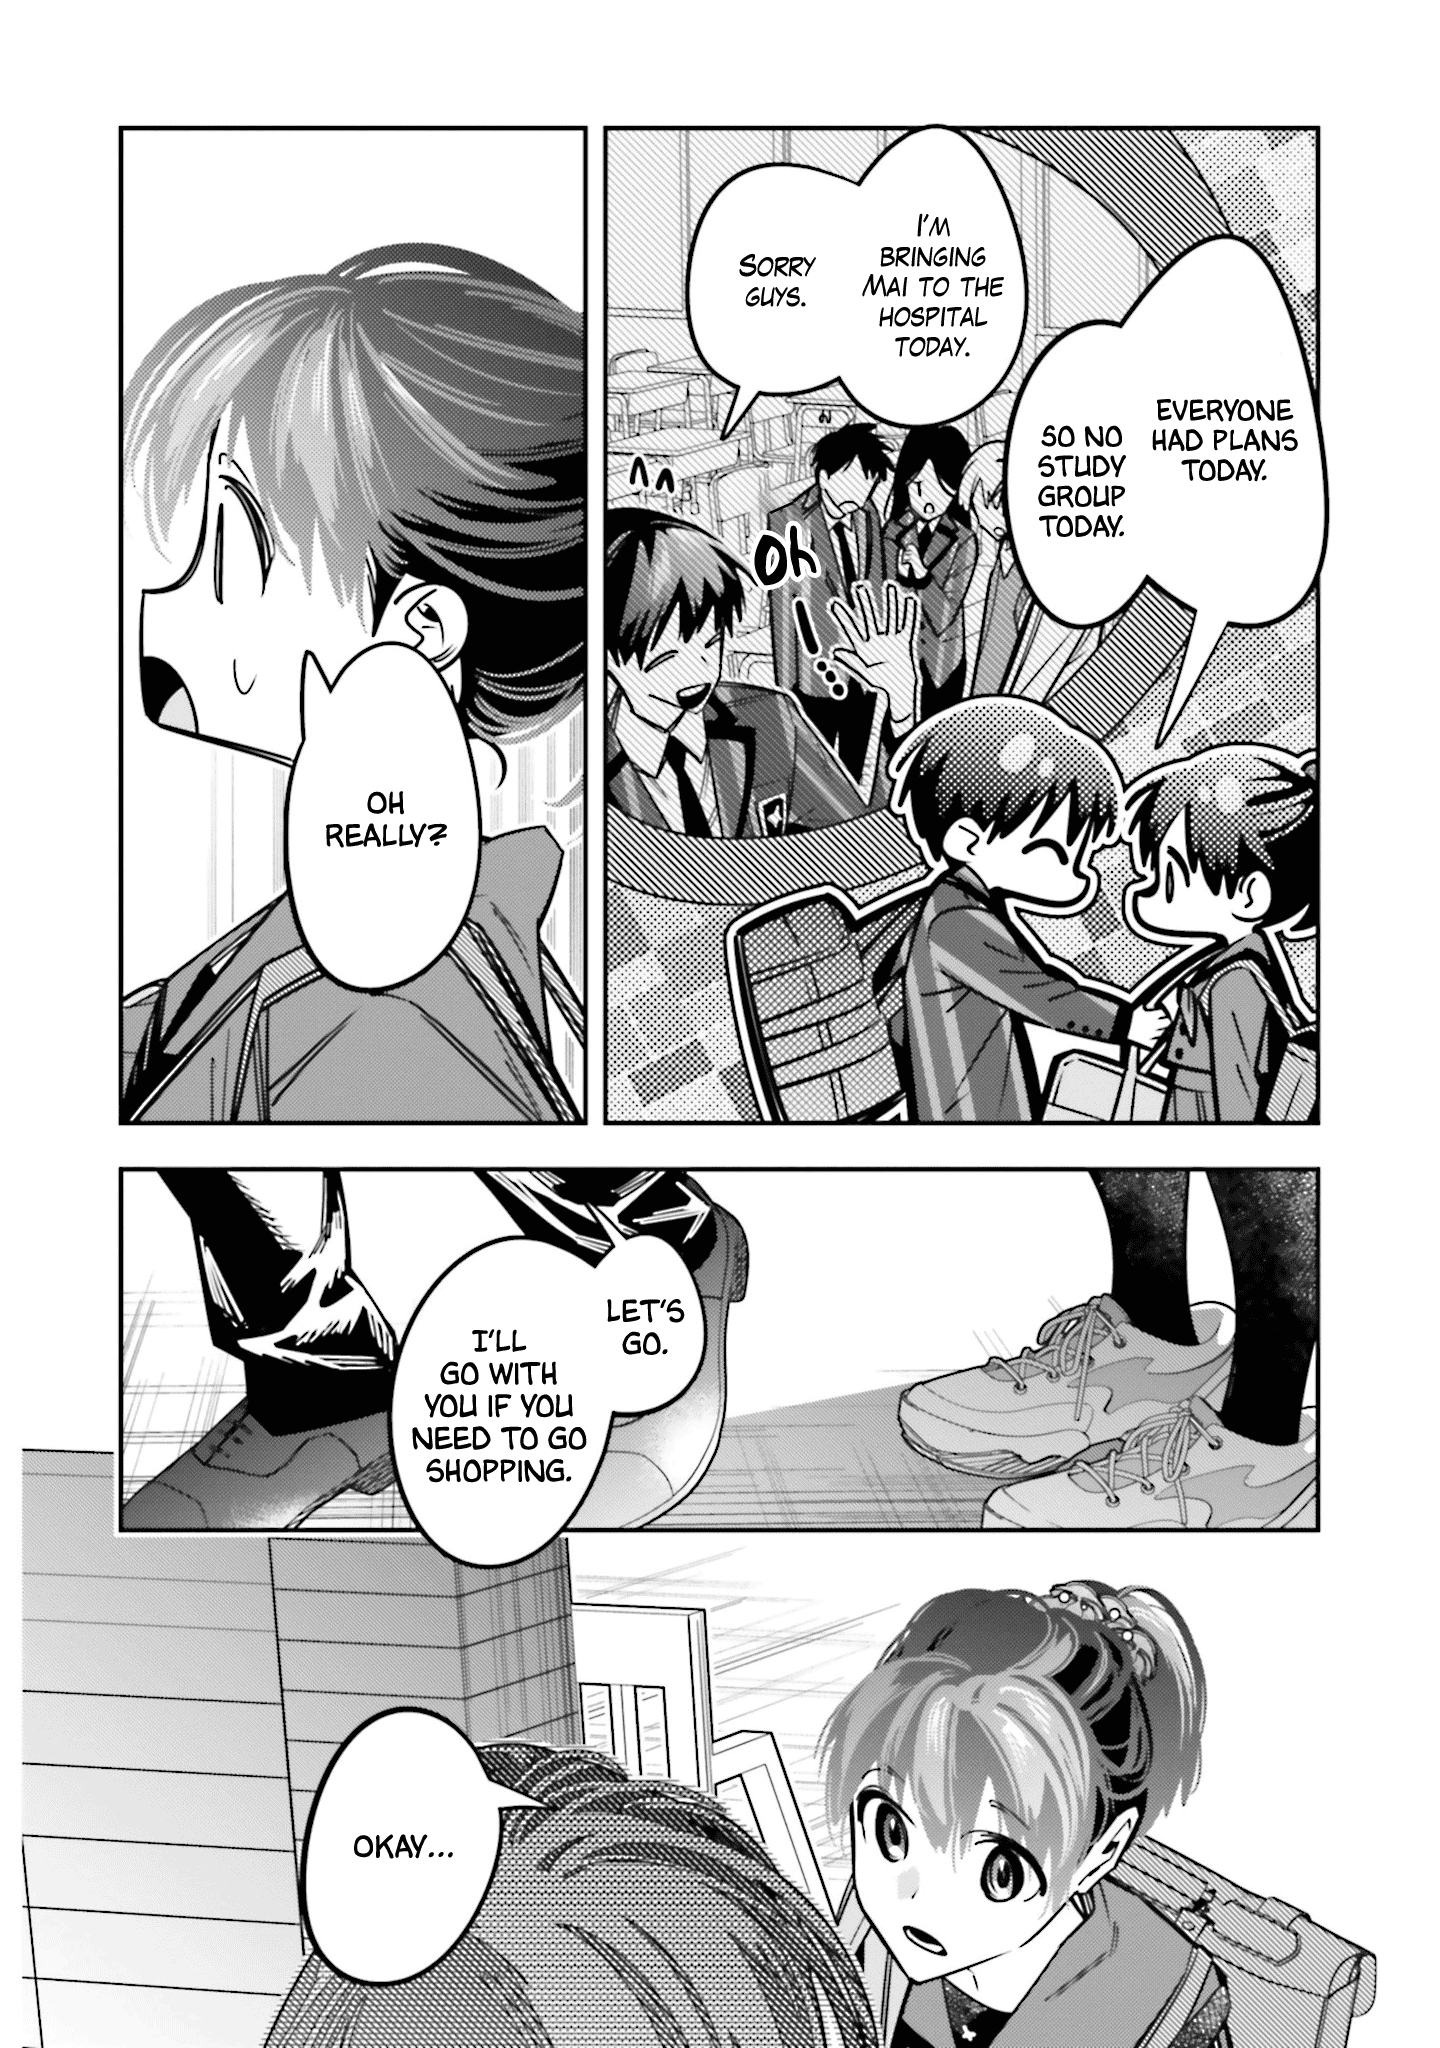 I Reincarnated As The Little Sister Of A Death Game Manga's Murder Mastermind And Failed Chapter 9 #36